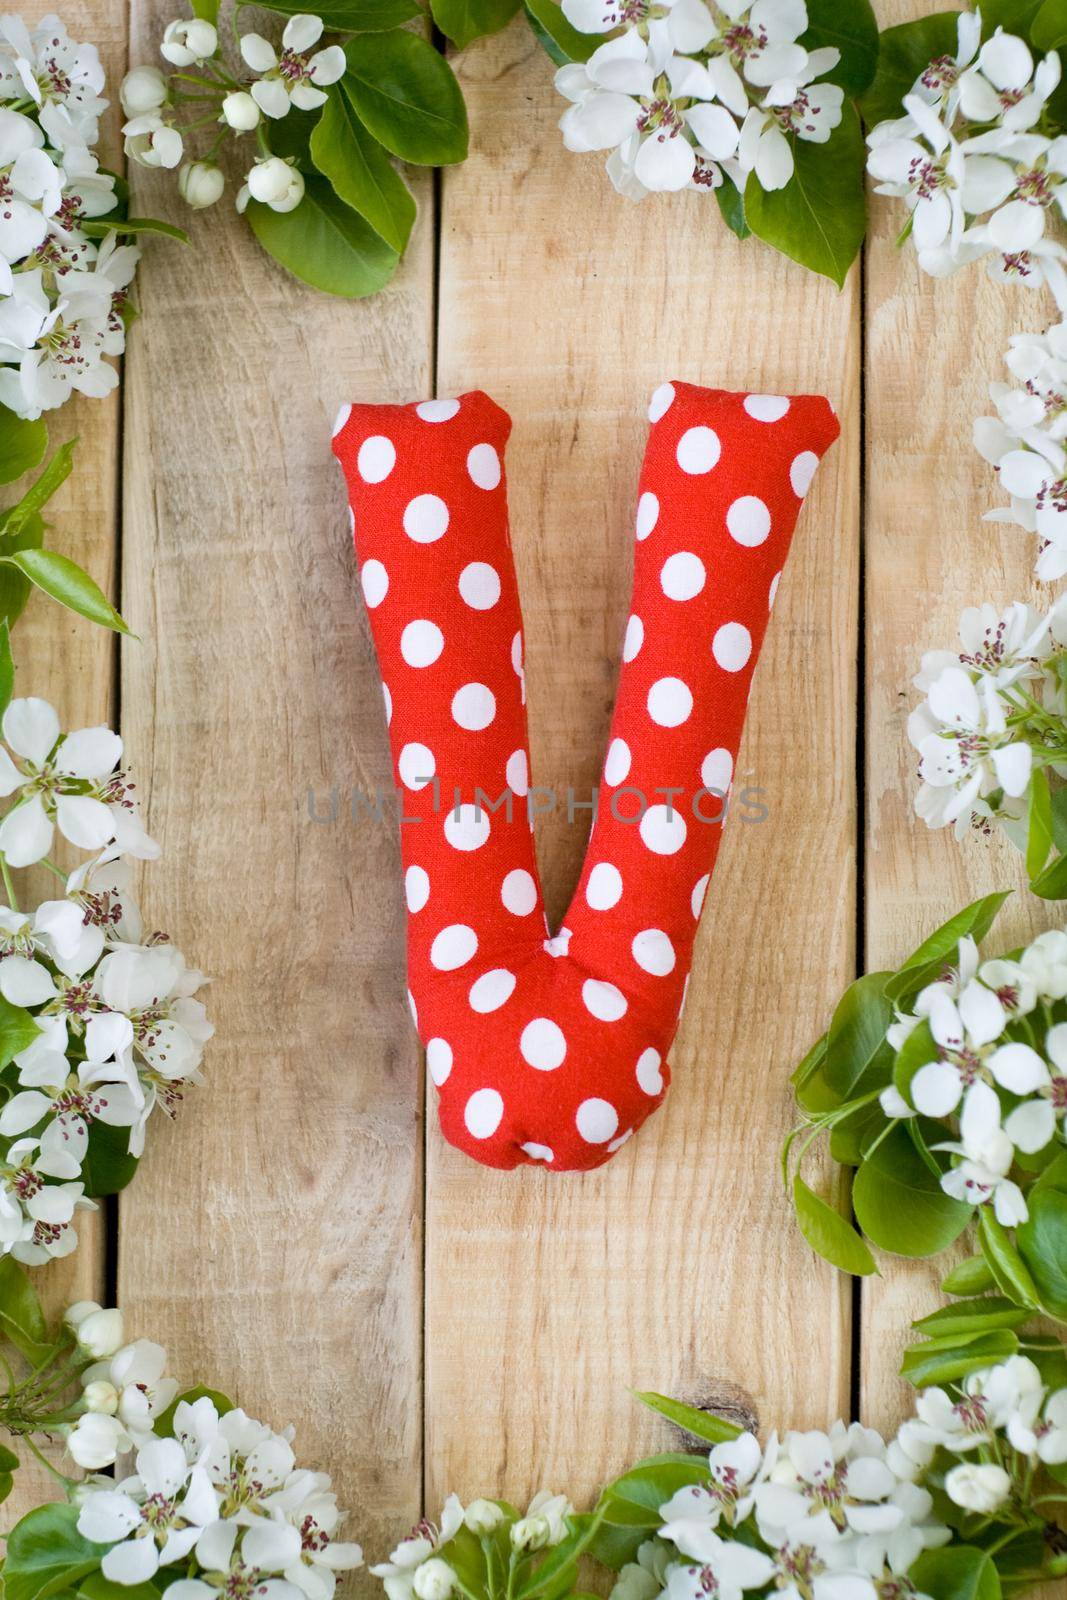 Natural wooden background with white flowers fruit tree. In the middle is the letter V, is made of red polka dot fabric.